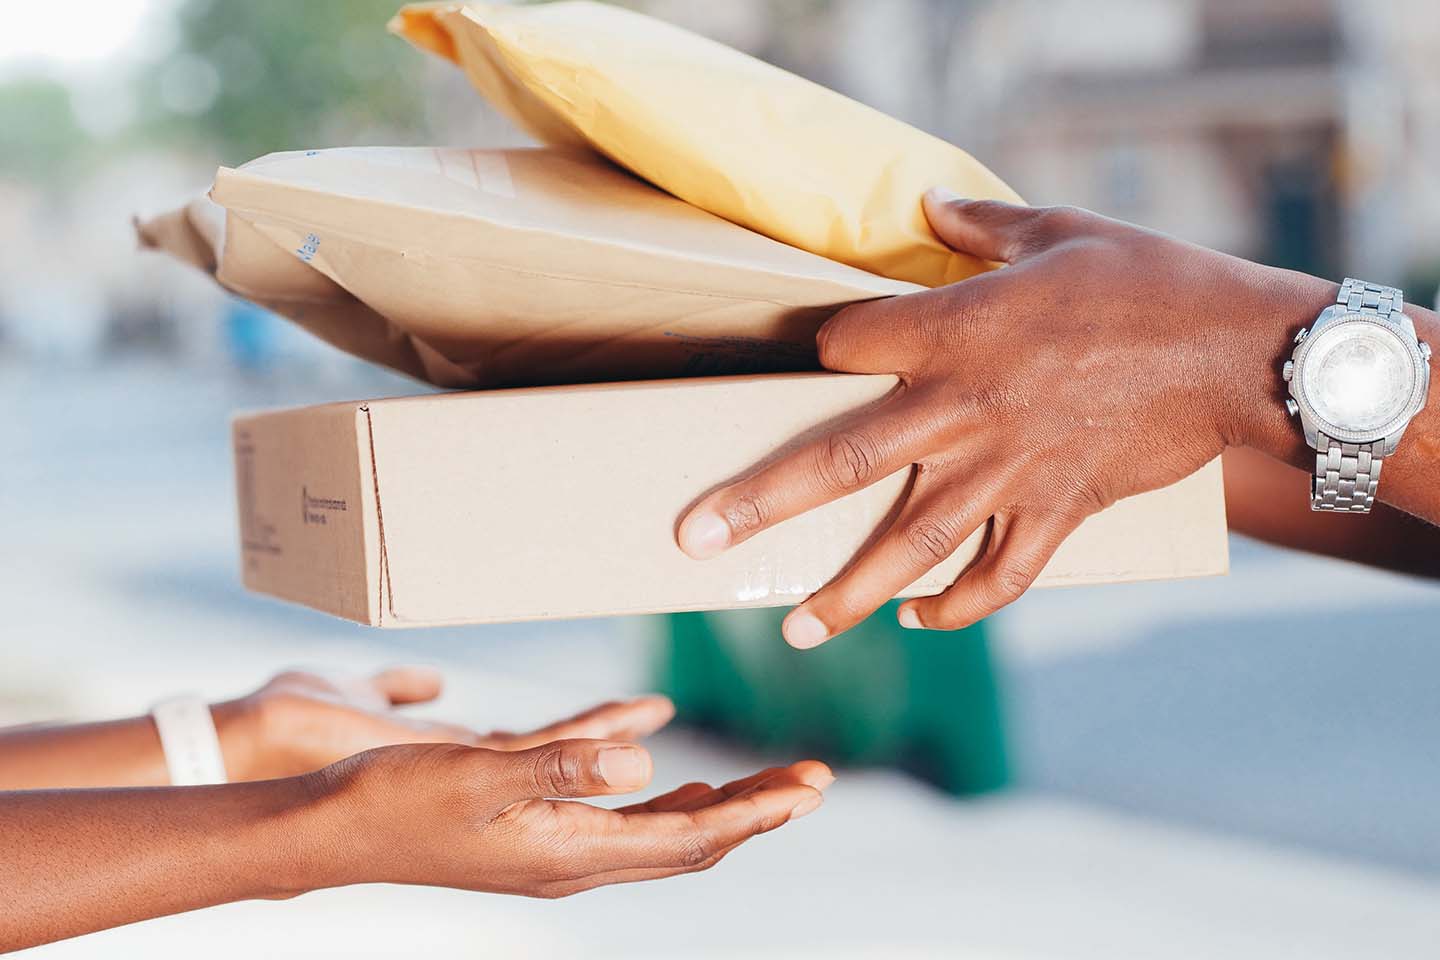 someone receiving a variety of parcels from a delivery person